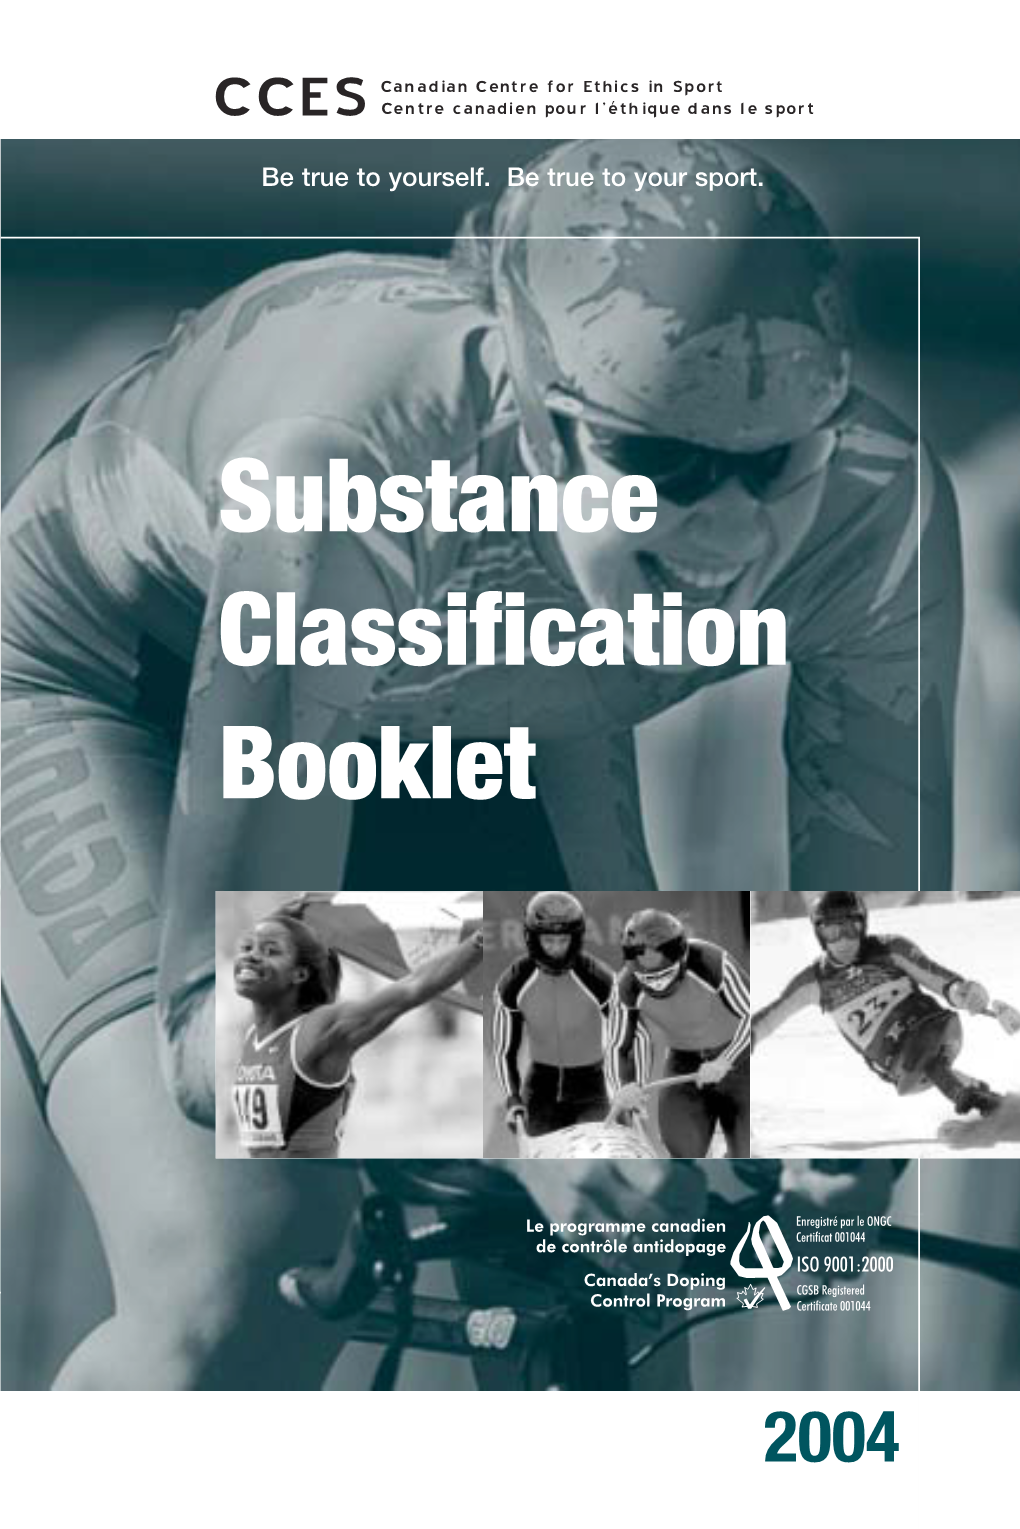 CCES Substance Classification Information